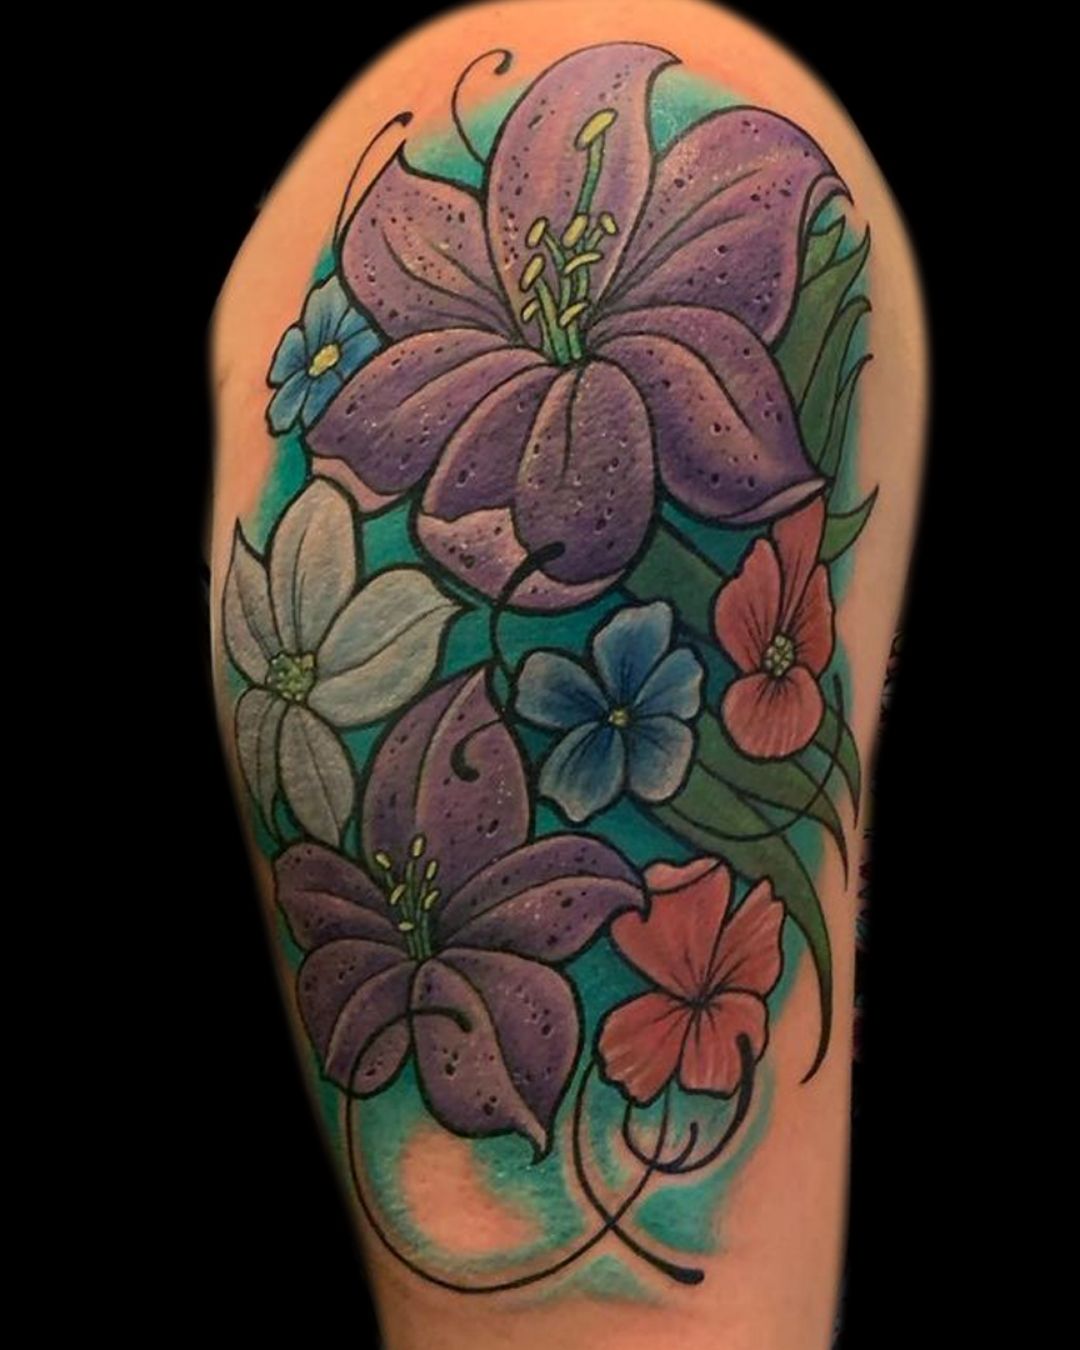 Surreal tattoo style with forest flowers in outer space on Craiyon